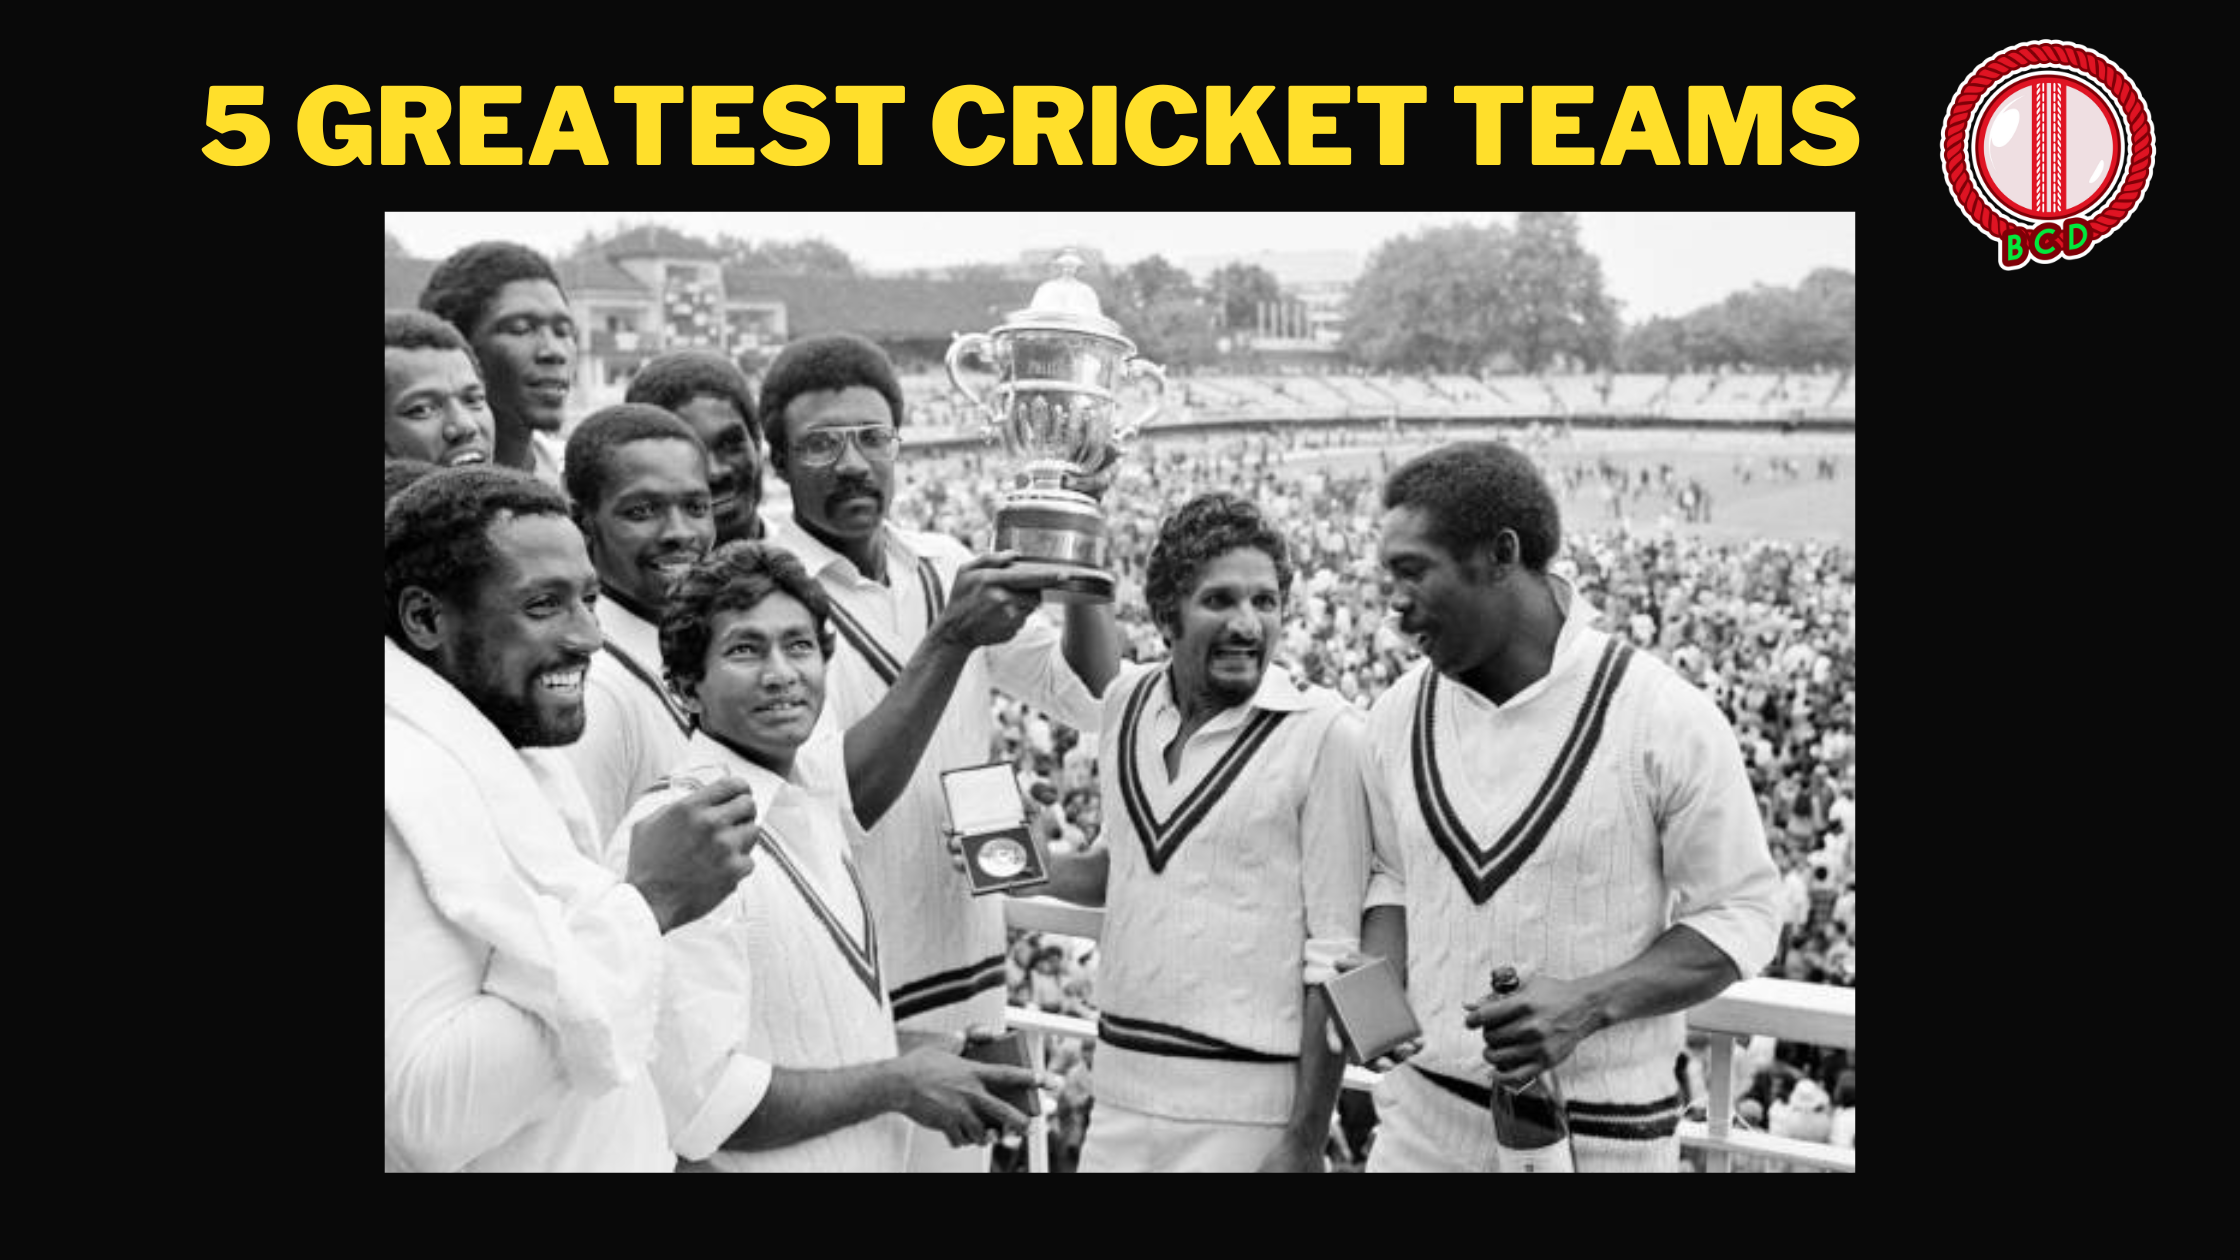 Photo of 1979 Cricket World Cup winning moment with captain Clive Lloyd - Greatest Cricket Teams Candidate